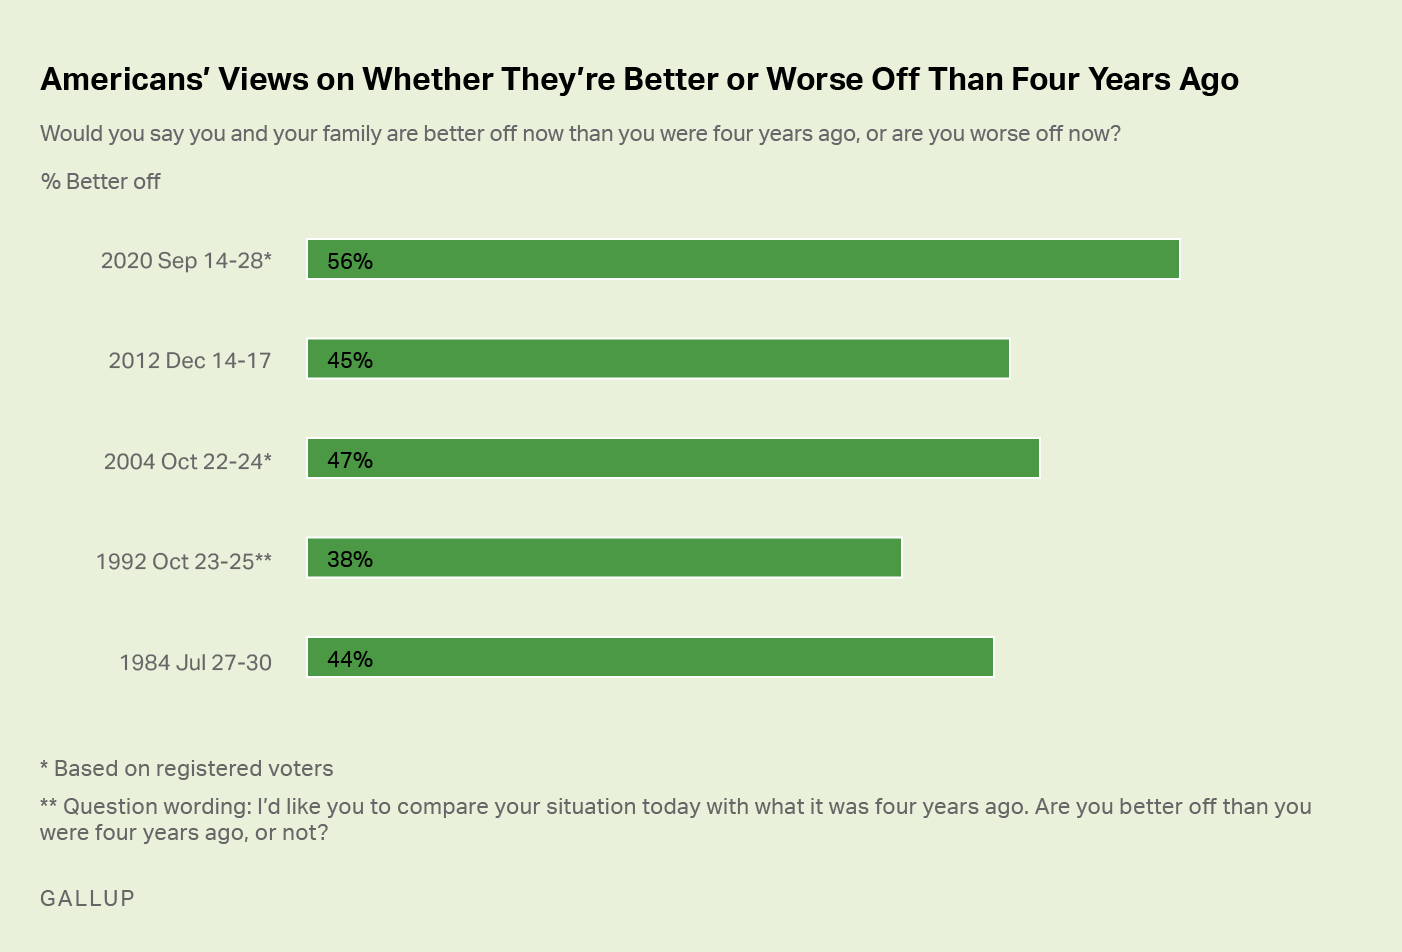 Gallup (7 October 2020): Americans' Views on Whether They're Better or Worse Off Than Four Years Ago